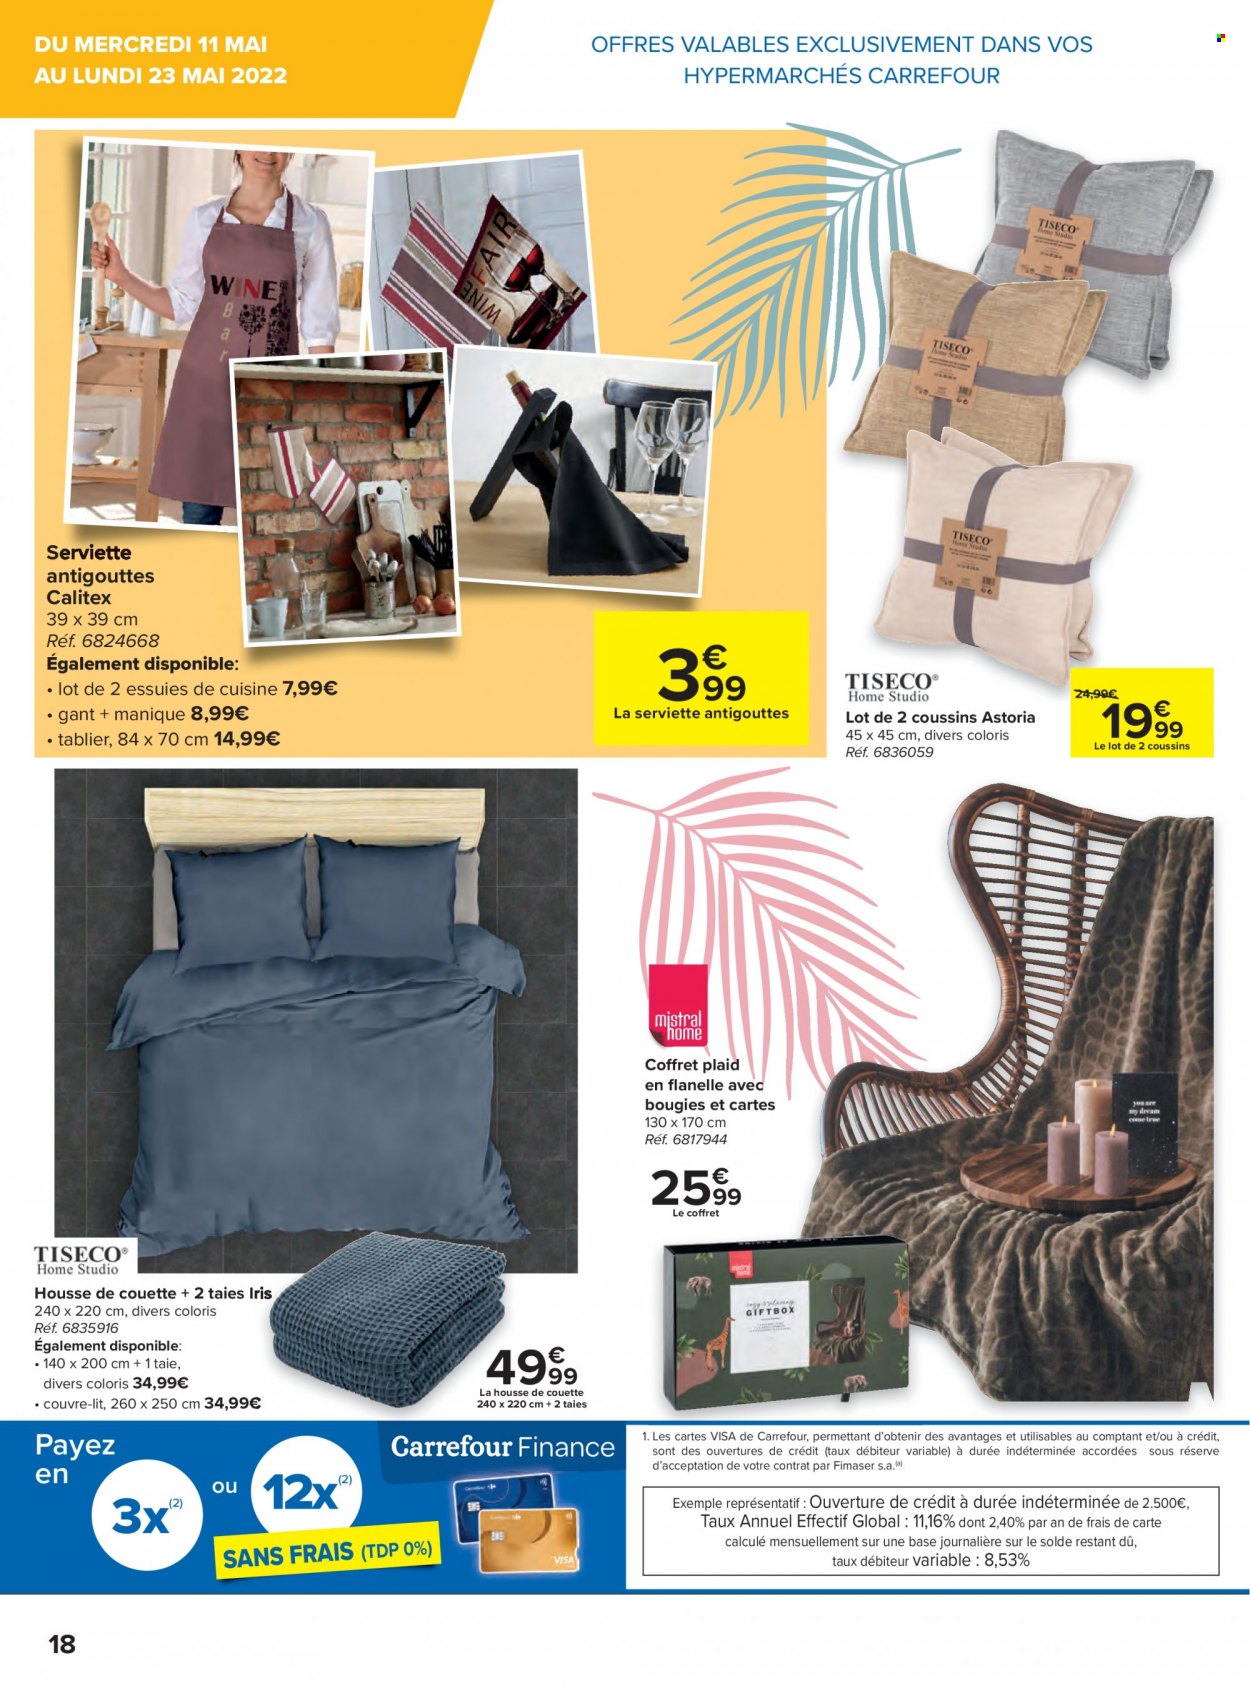 Catalogue Carrefour hypermarkt - 11.5.2022 - 23.5.2022. Page 18.